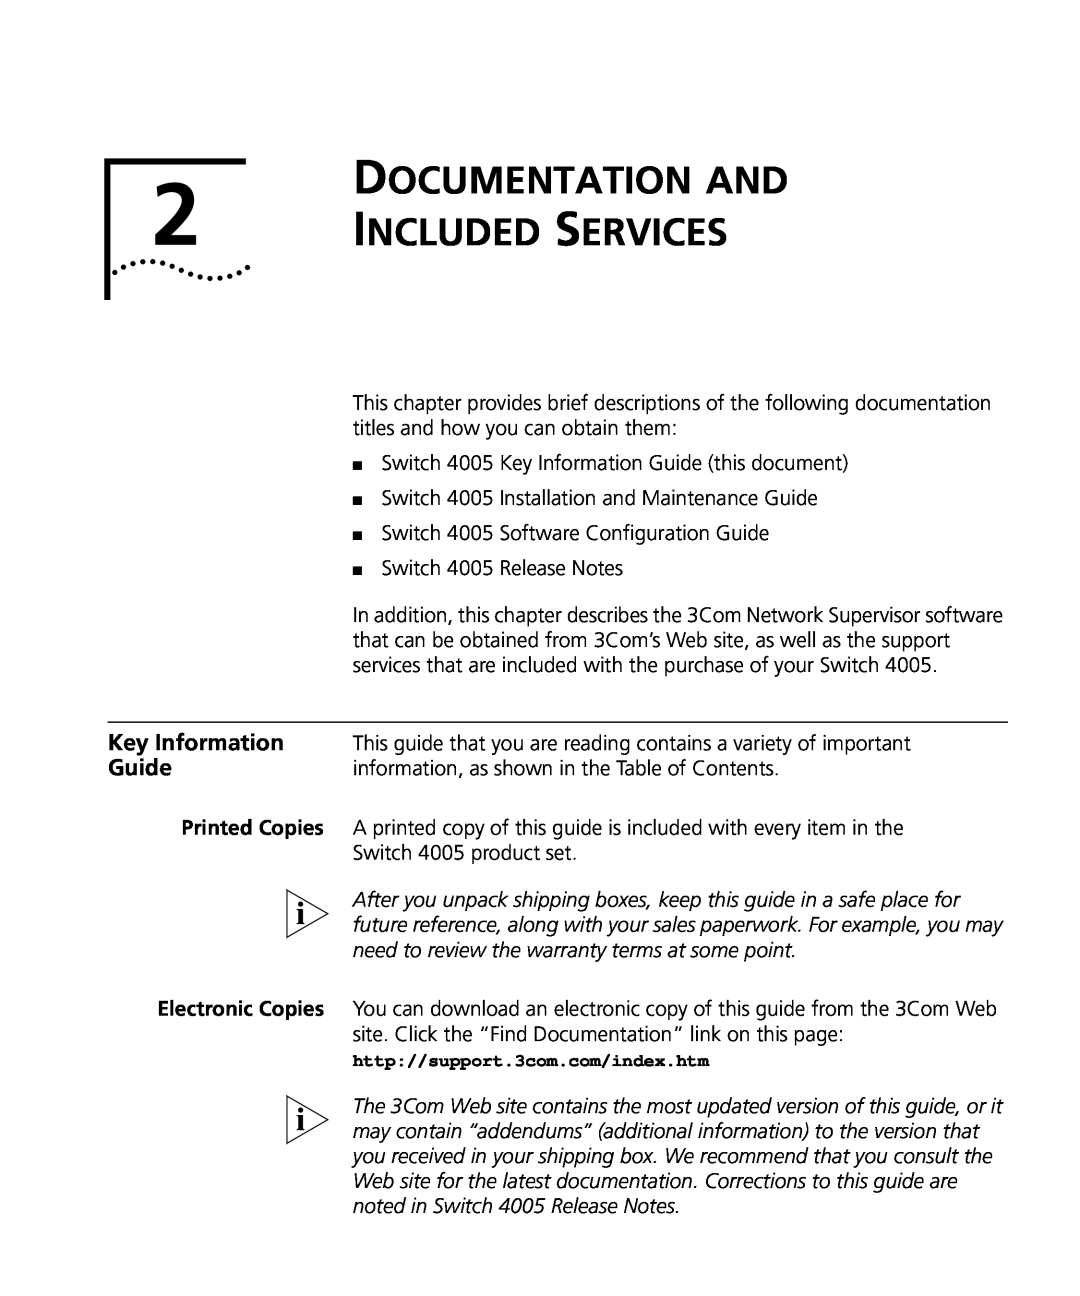 3Com 4005 DOCUMENTATION AND 2 INCLUDED SERVICES, Key Information, Guide, information, as shown in the Table of Contents 